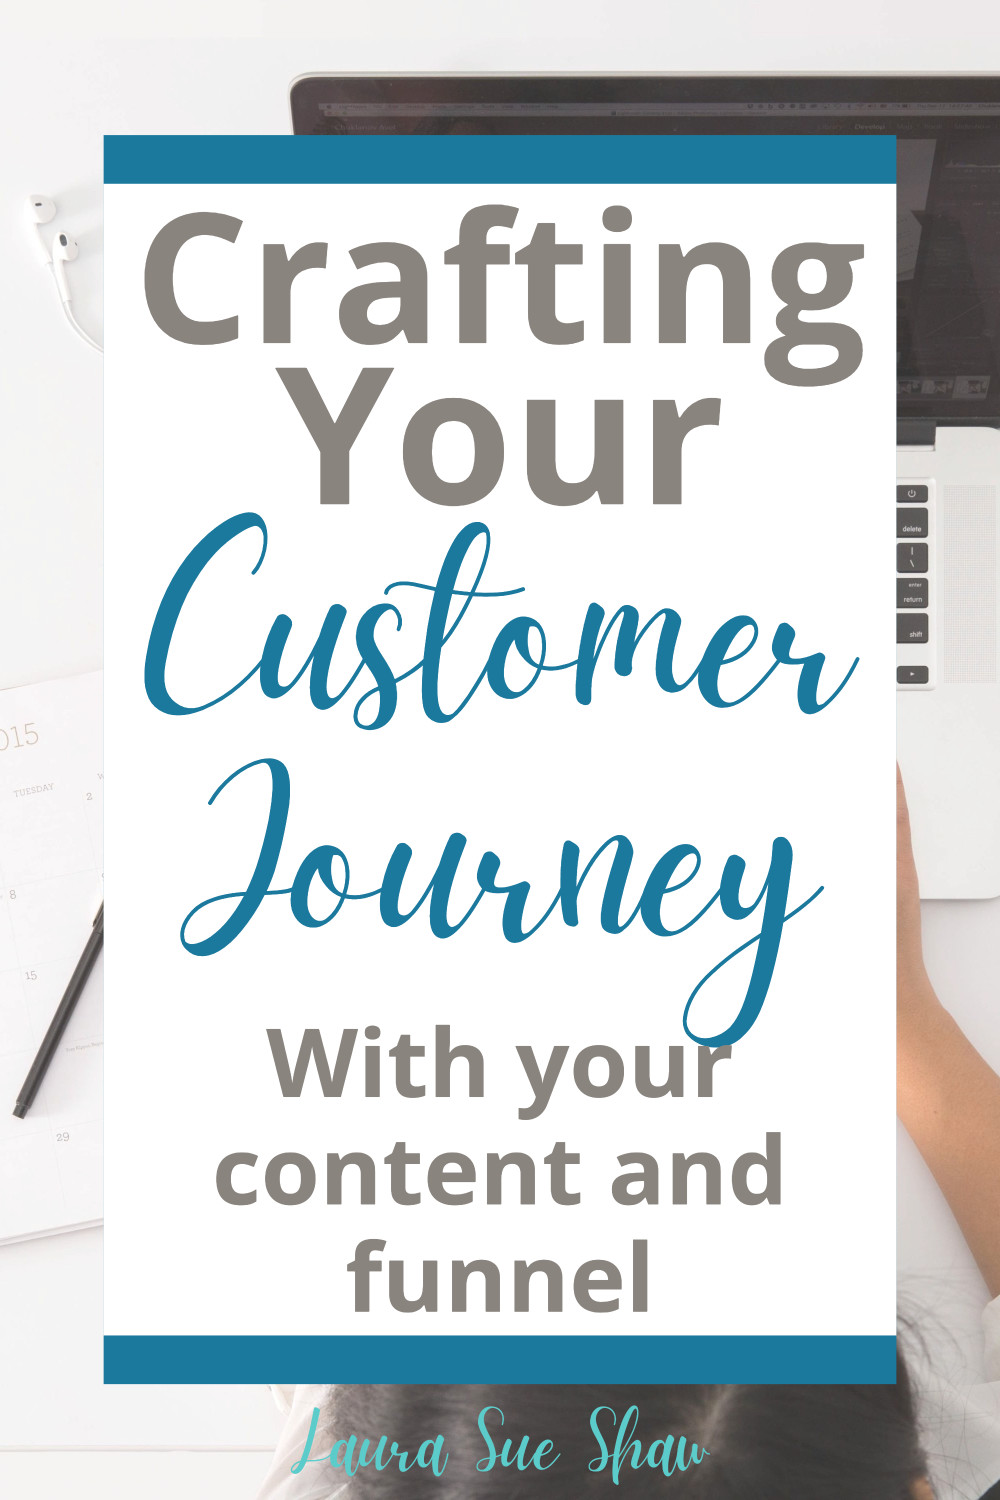 Here's how to start crafting an amazing customer journey with your free content, email marketing, and paid offers.